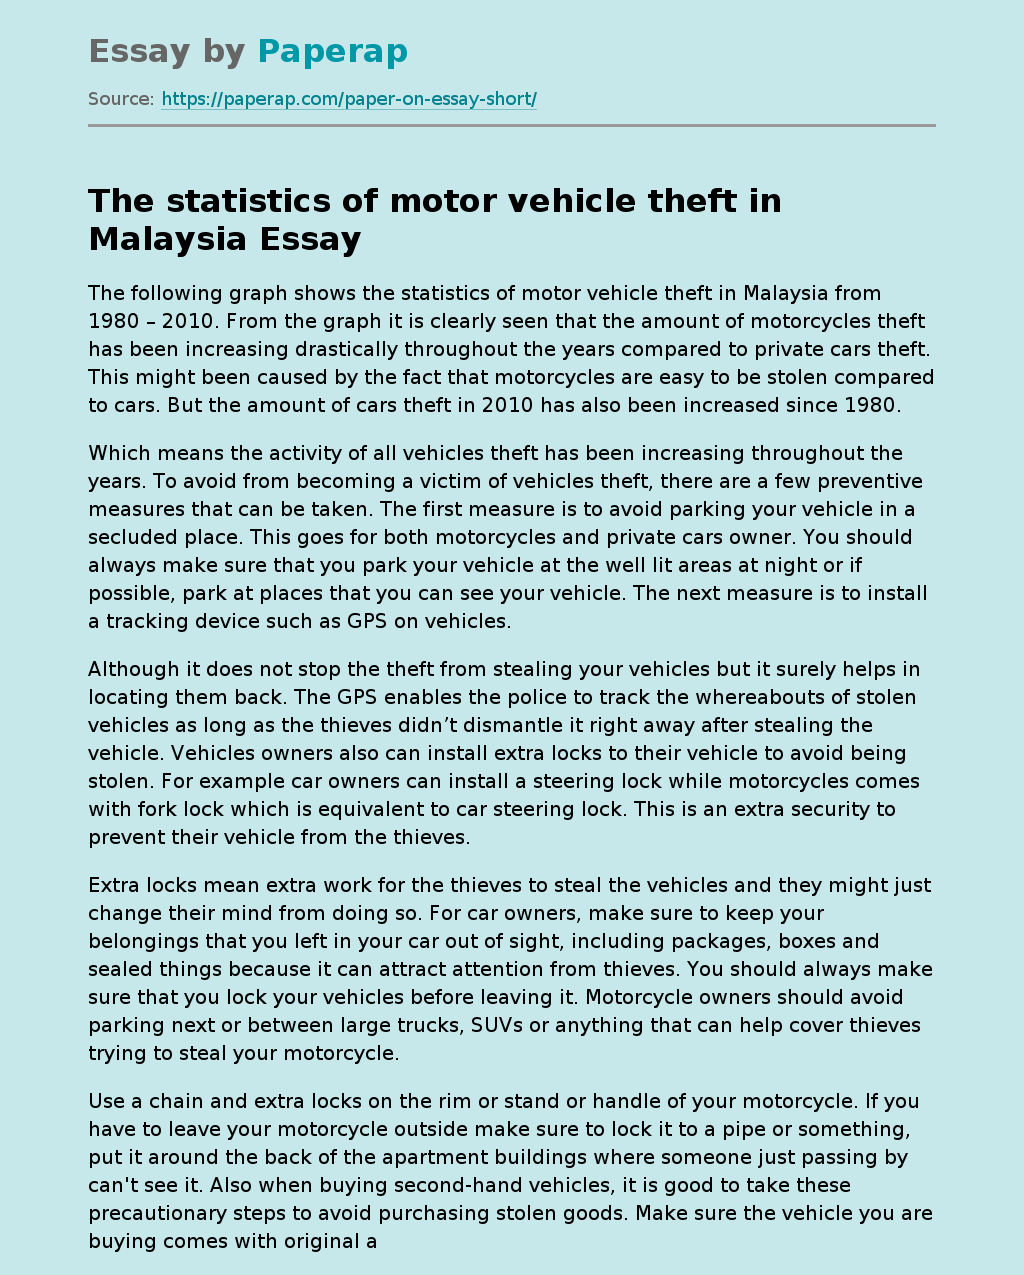 The statistics of motor vehicle theft in Malaysia